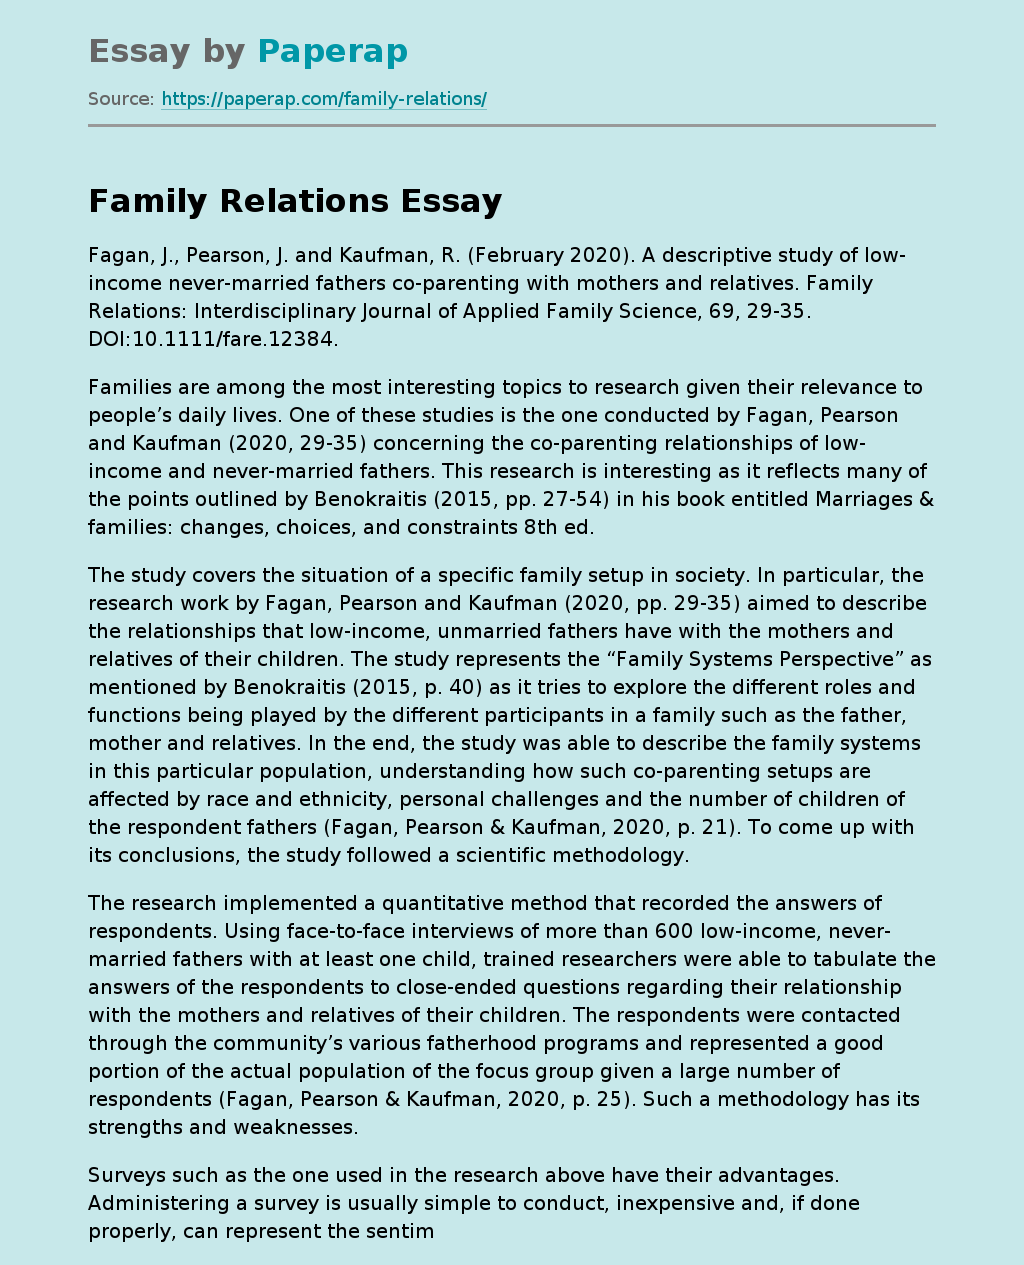 write an essay on family relations